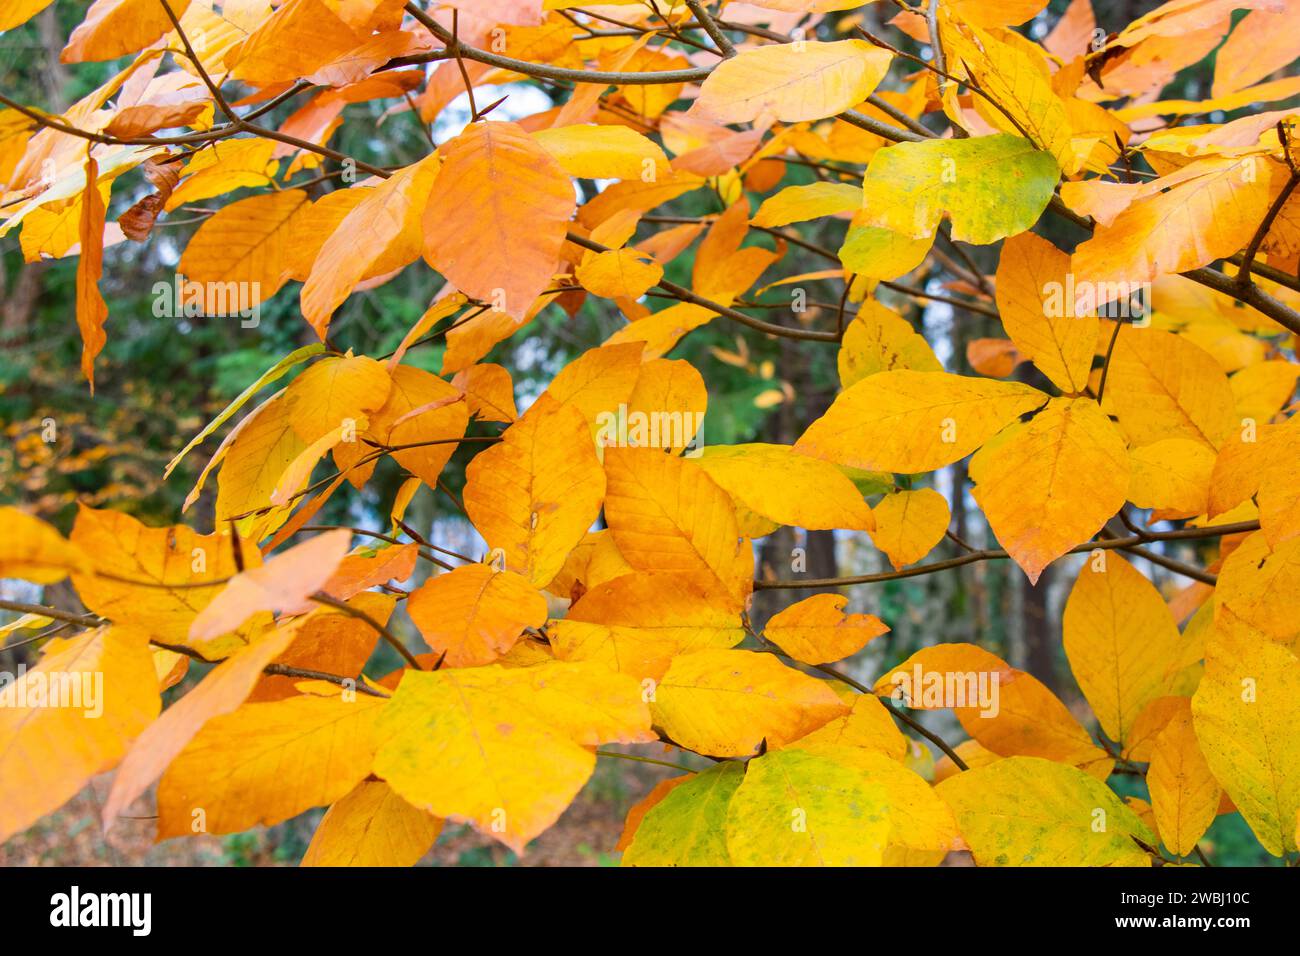 A vibrant autumn tree branch displaying with lush yellow foliage Stock Photo